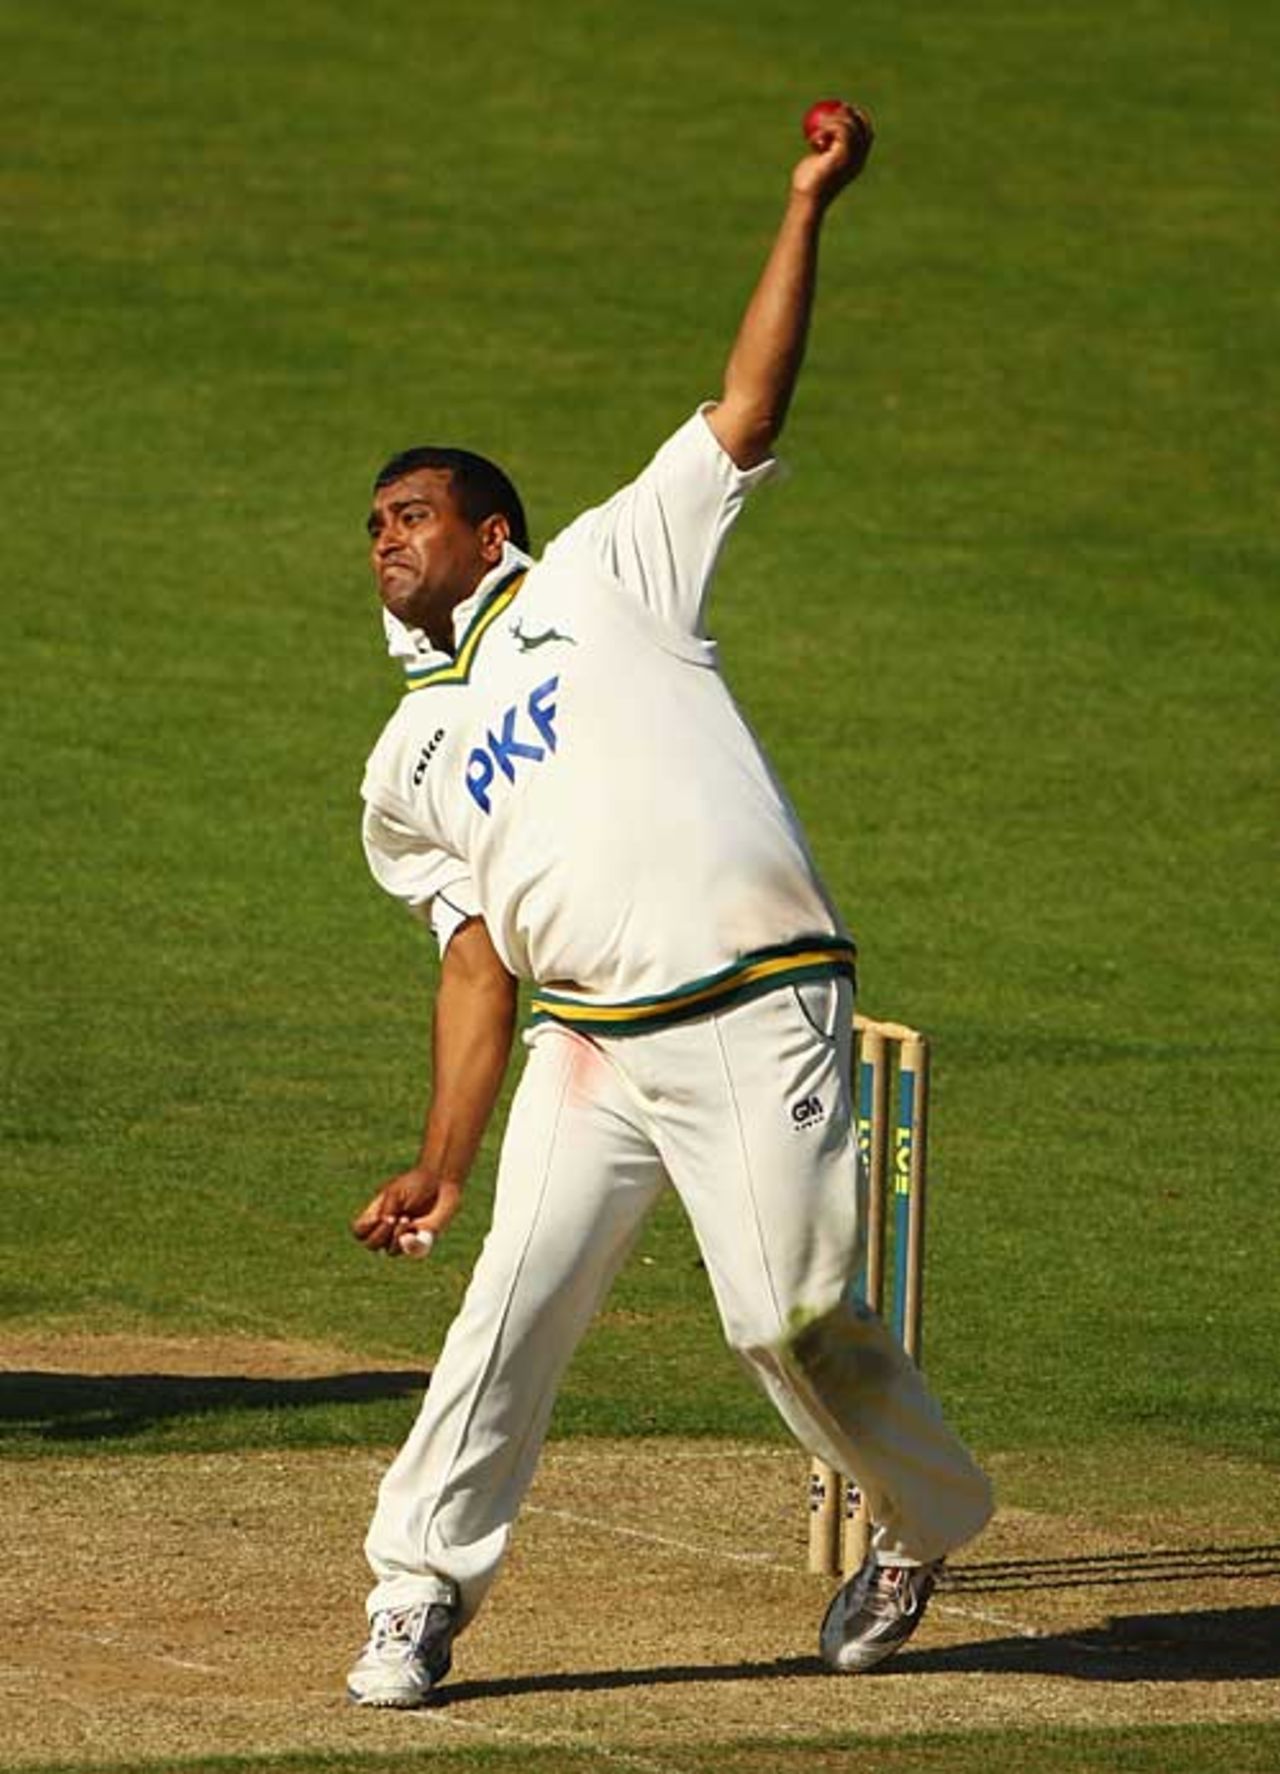 Samit Patel had plenty of work as Nottinghamshire toiled in the field, Durham v Nottinghamshire, County Championship, 1st day, Chester-le-Street, September 10, 2009